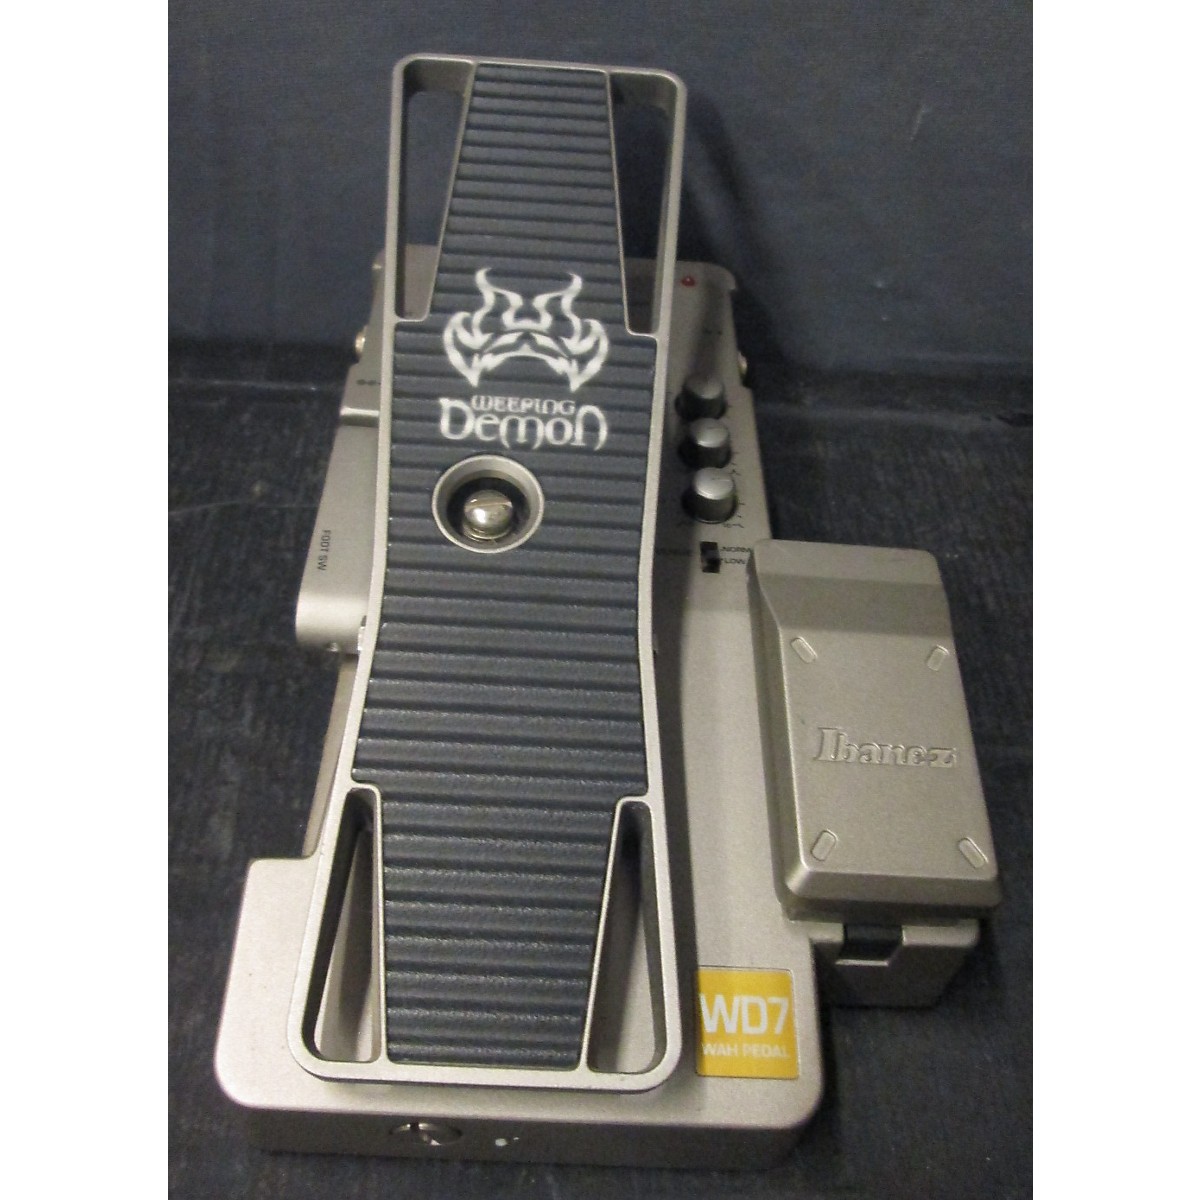 Used Ibanez WD7 Weeping Demon Wah Effect Pedal | Guitar Center